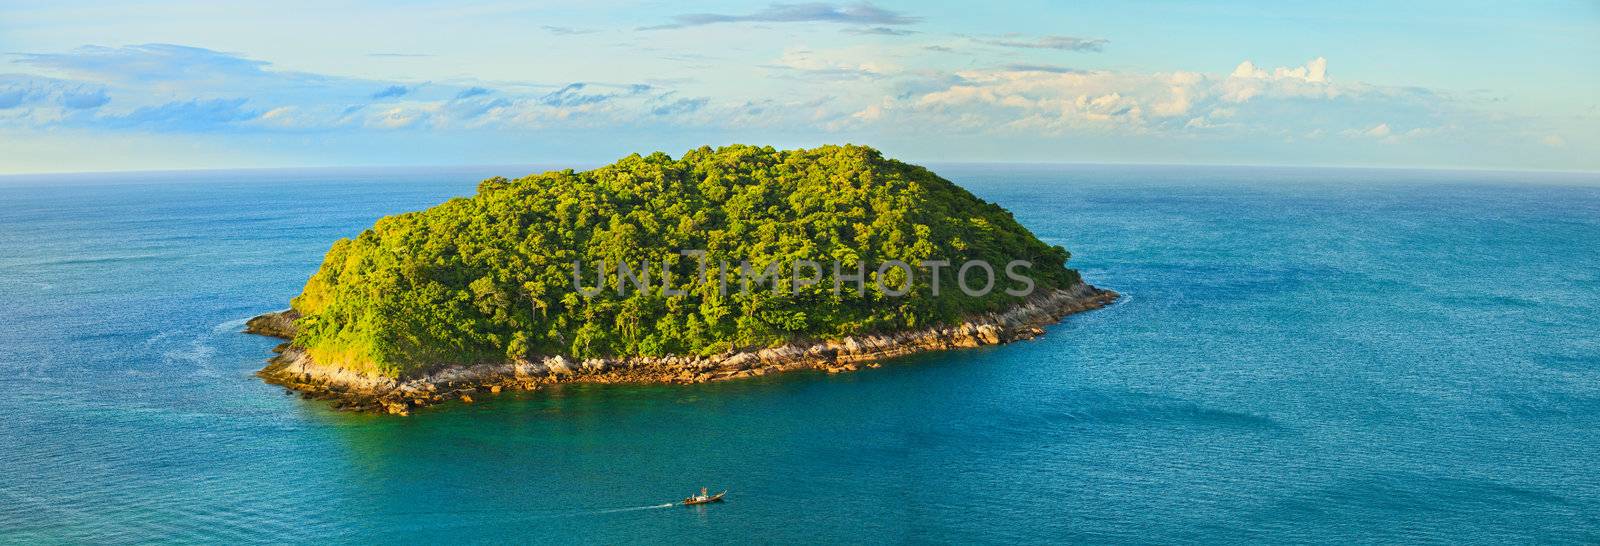 A large tropical island with a bird's-eye view